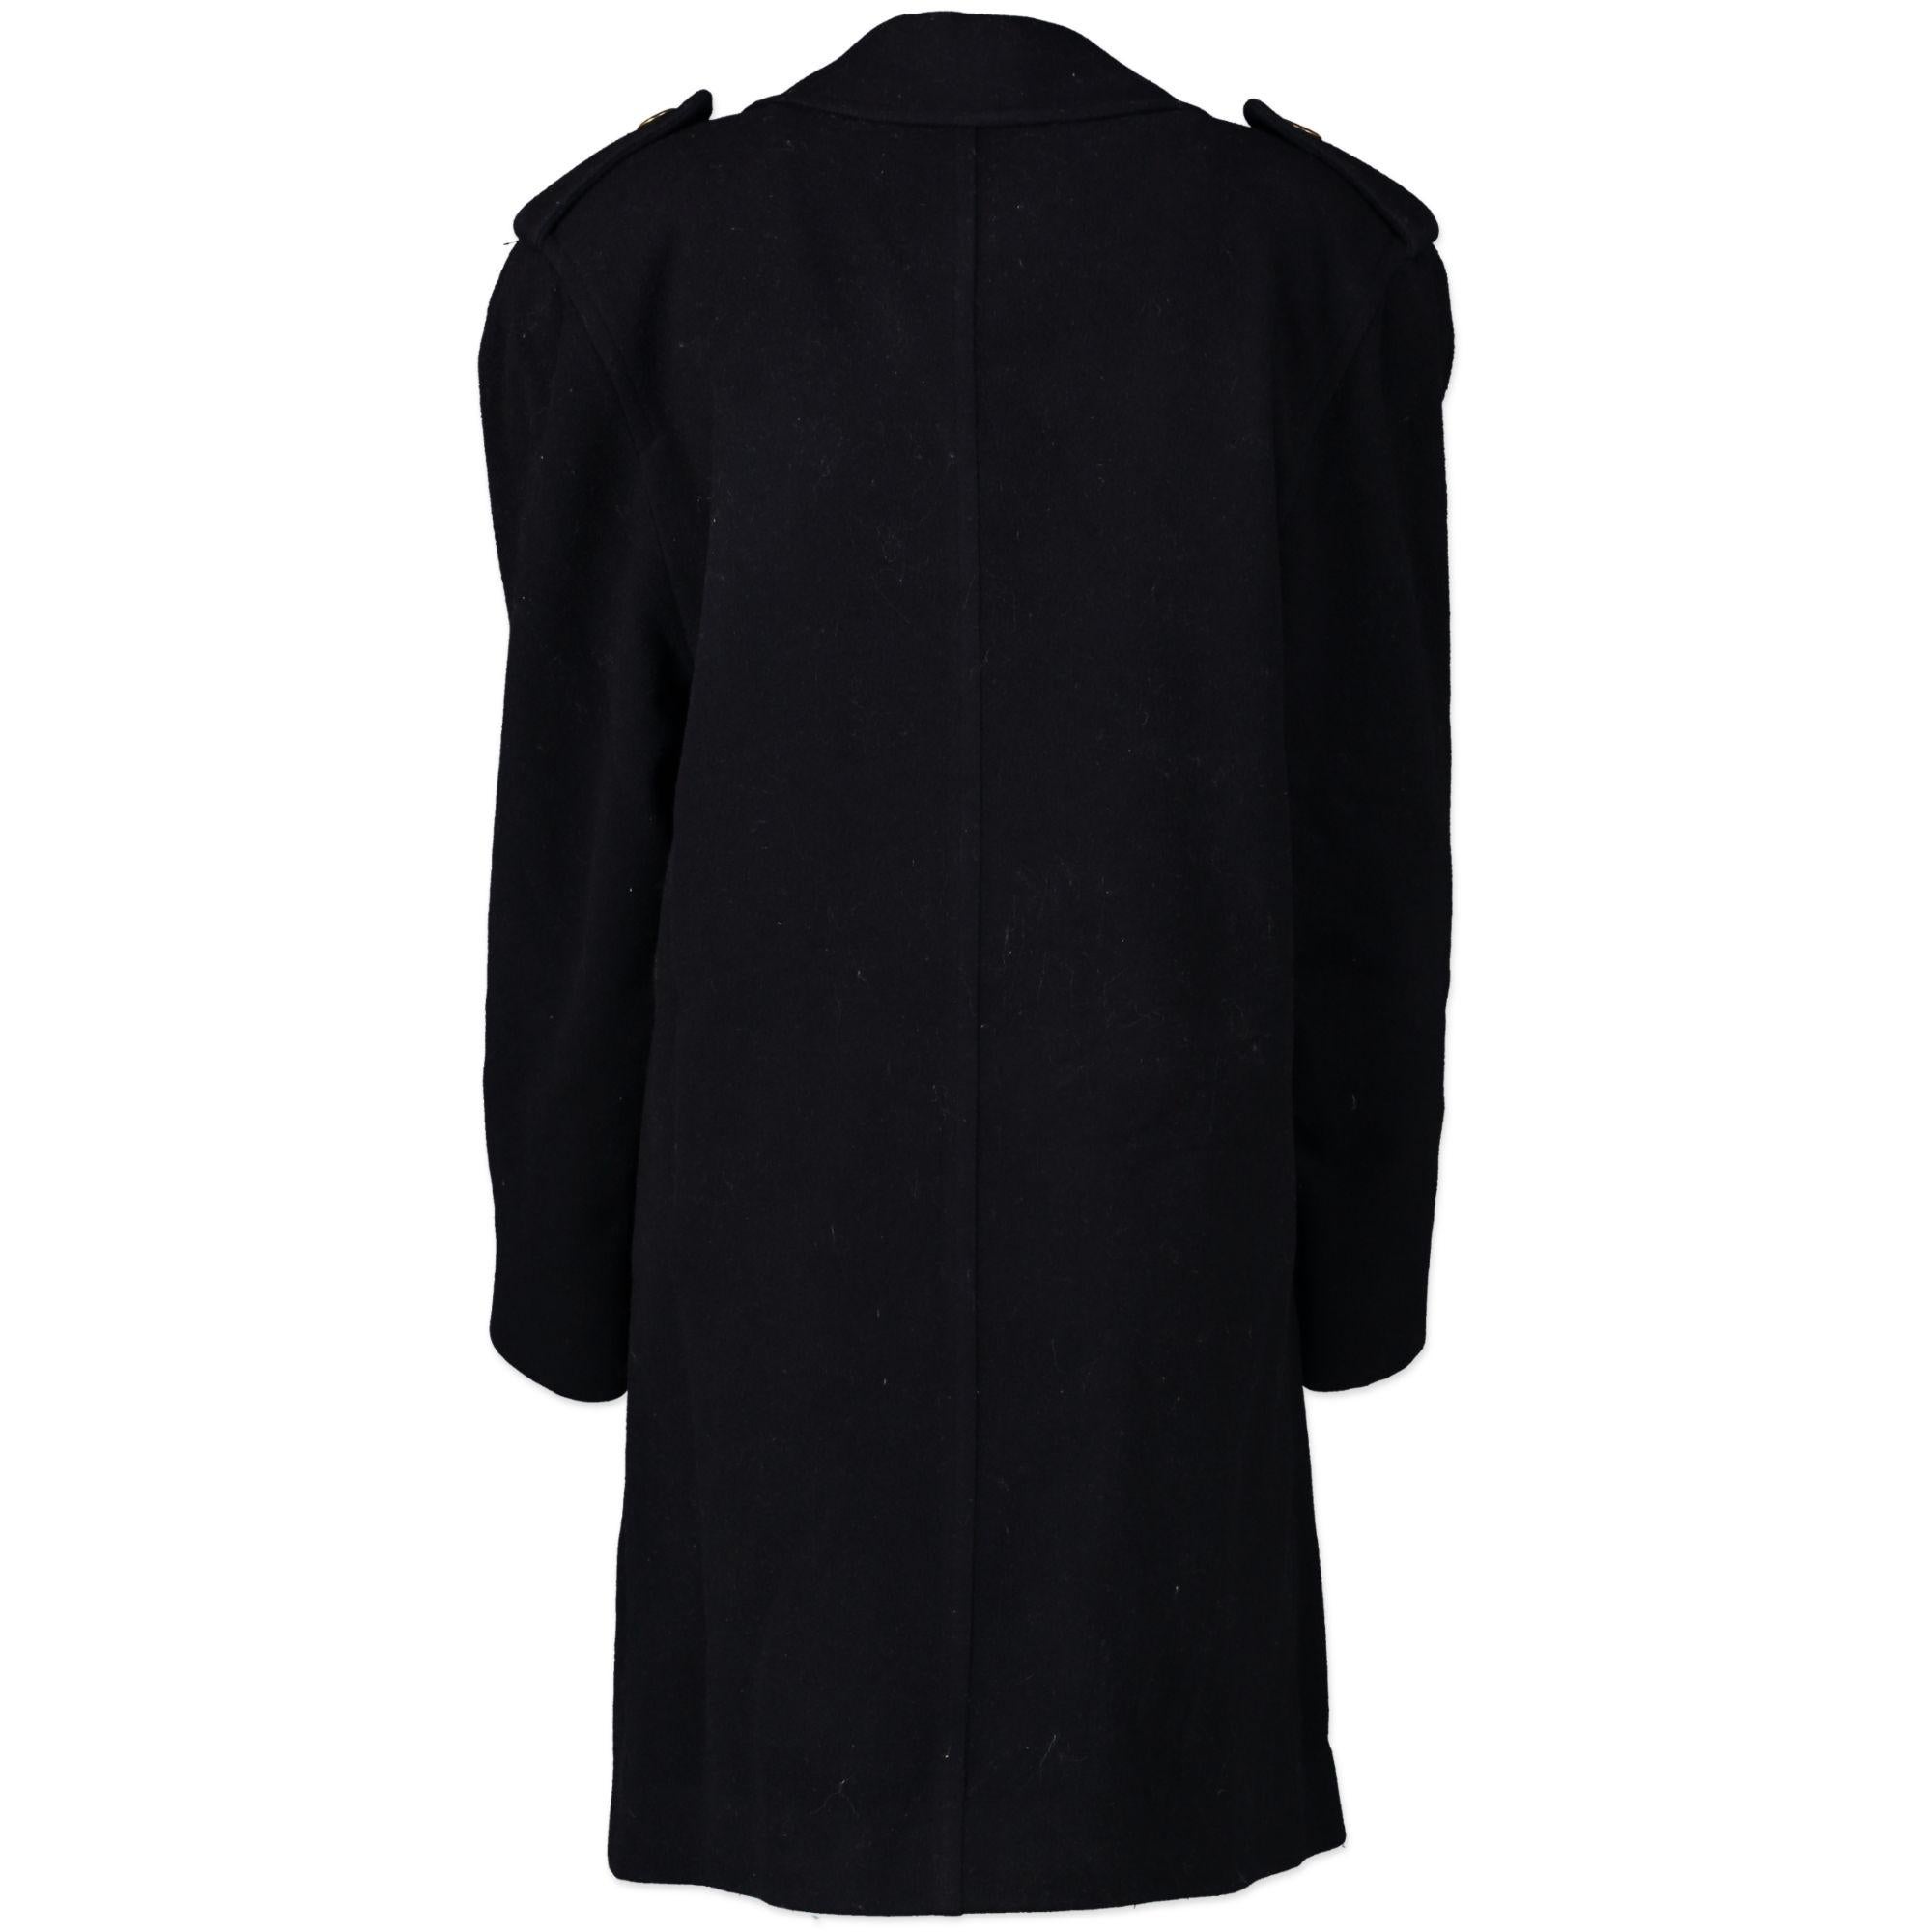 Good preloved condition

Burberry Navy Blue Wool Coat - Size 38

Keep yourself warm with this beautiful Burberry wool coat. The coat comes in a gorgeous navy blue color which is perfect for combining with any other color and is crafted from wool and